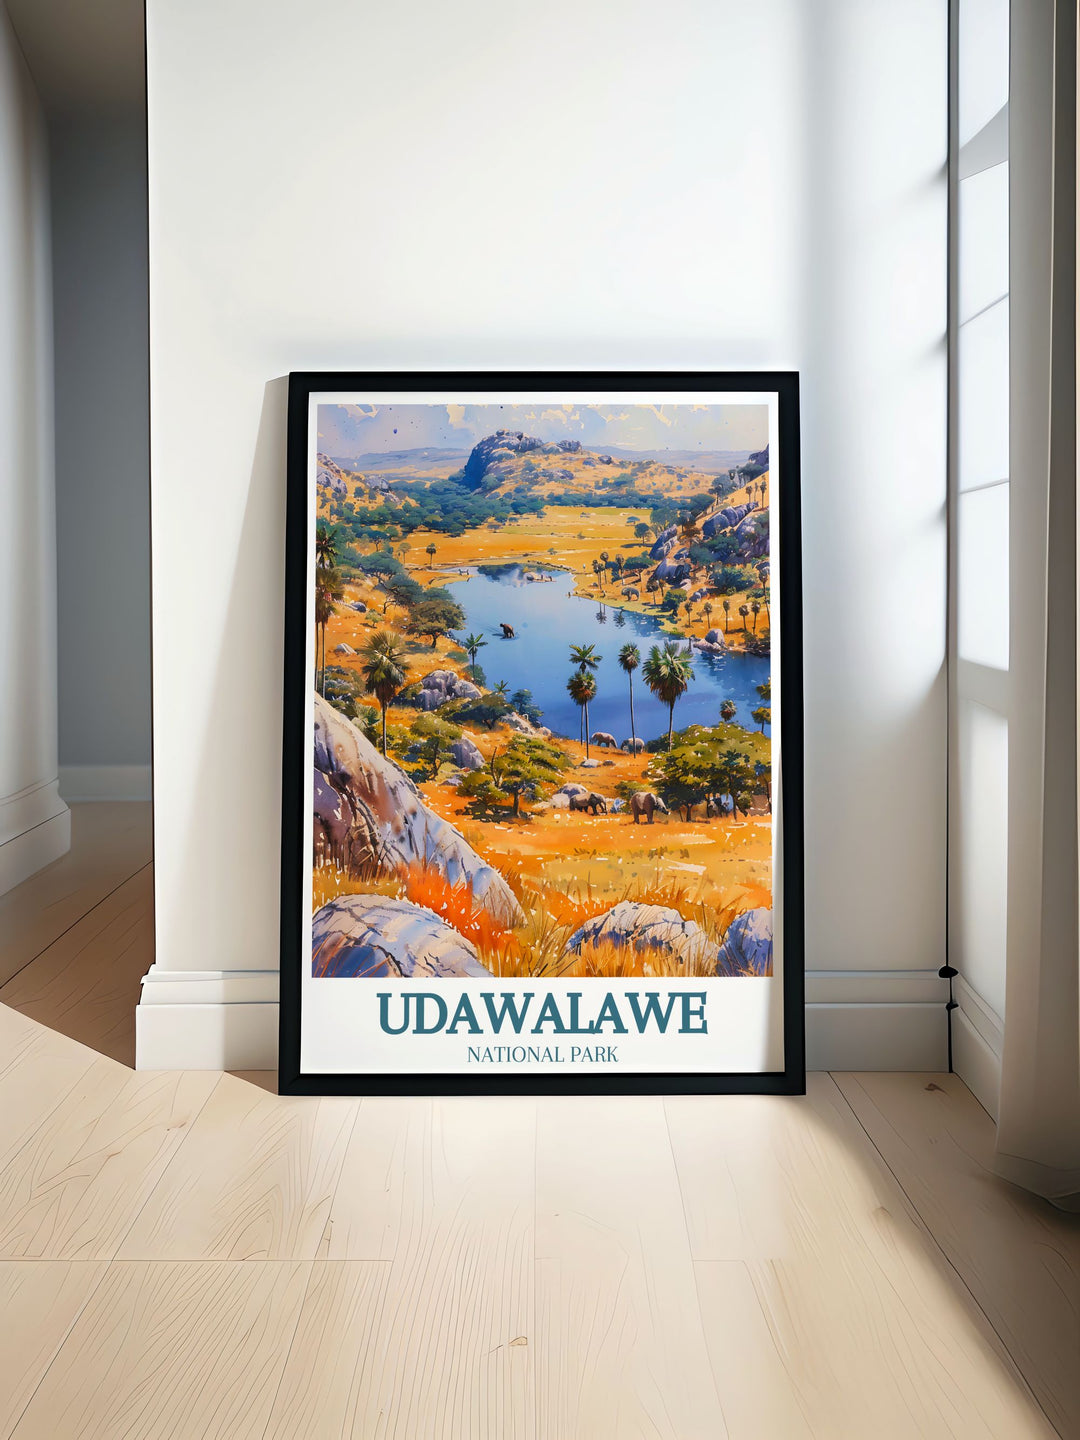 Udawalawe Reservoir Walawe River travel poster showcasing the stunning natural beauty and wildlife of Sri Lanka perfect for home decor and nature enthusiasts bringing the vibrant scenery of Udawalawe into your living space as a captivating wall art piece.